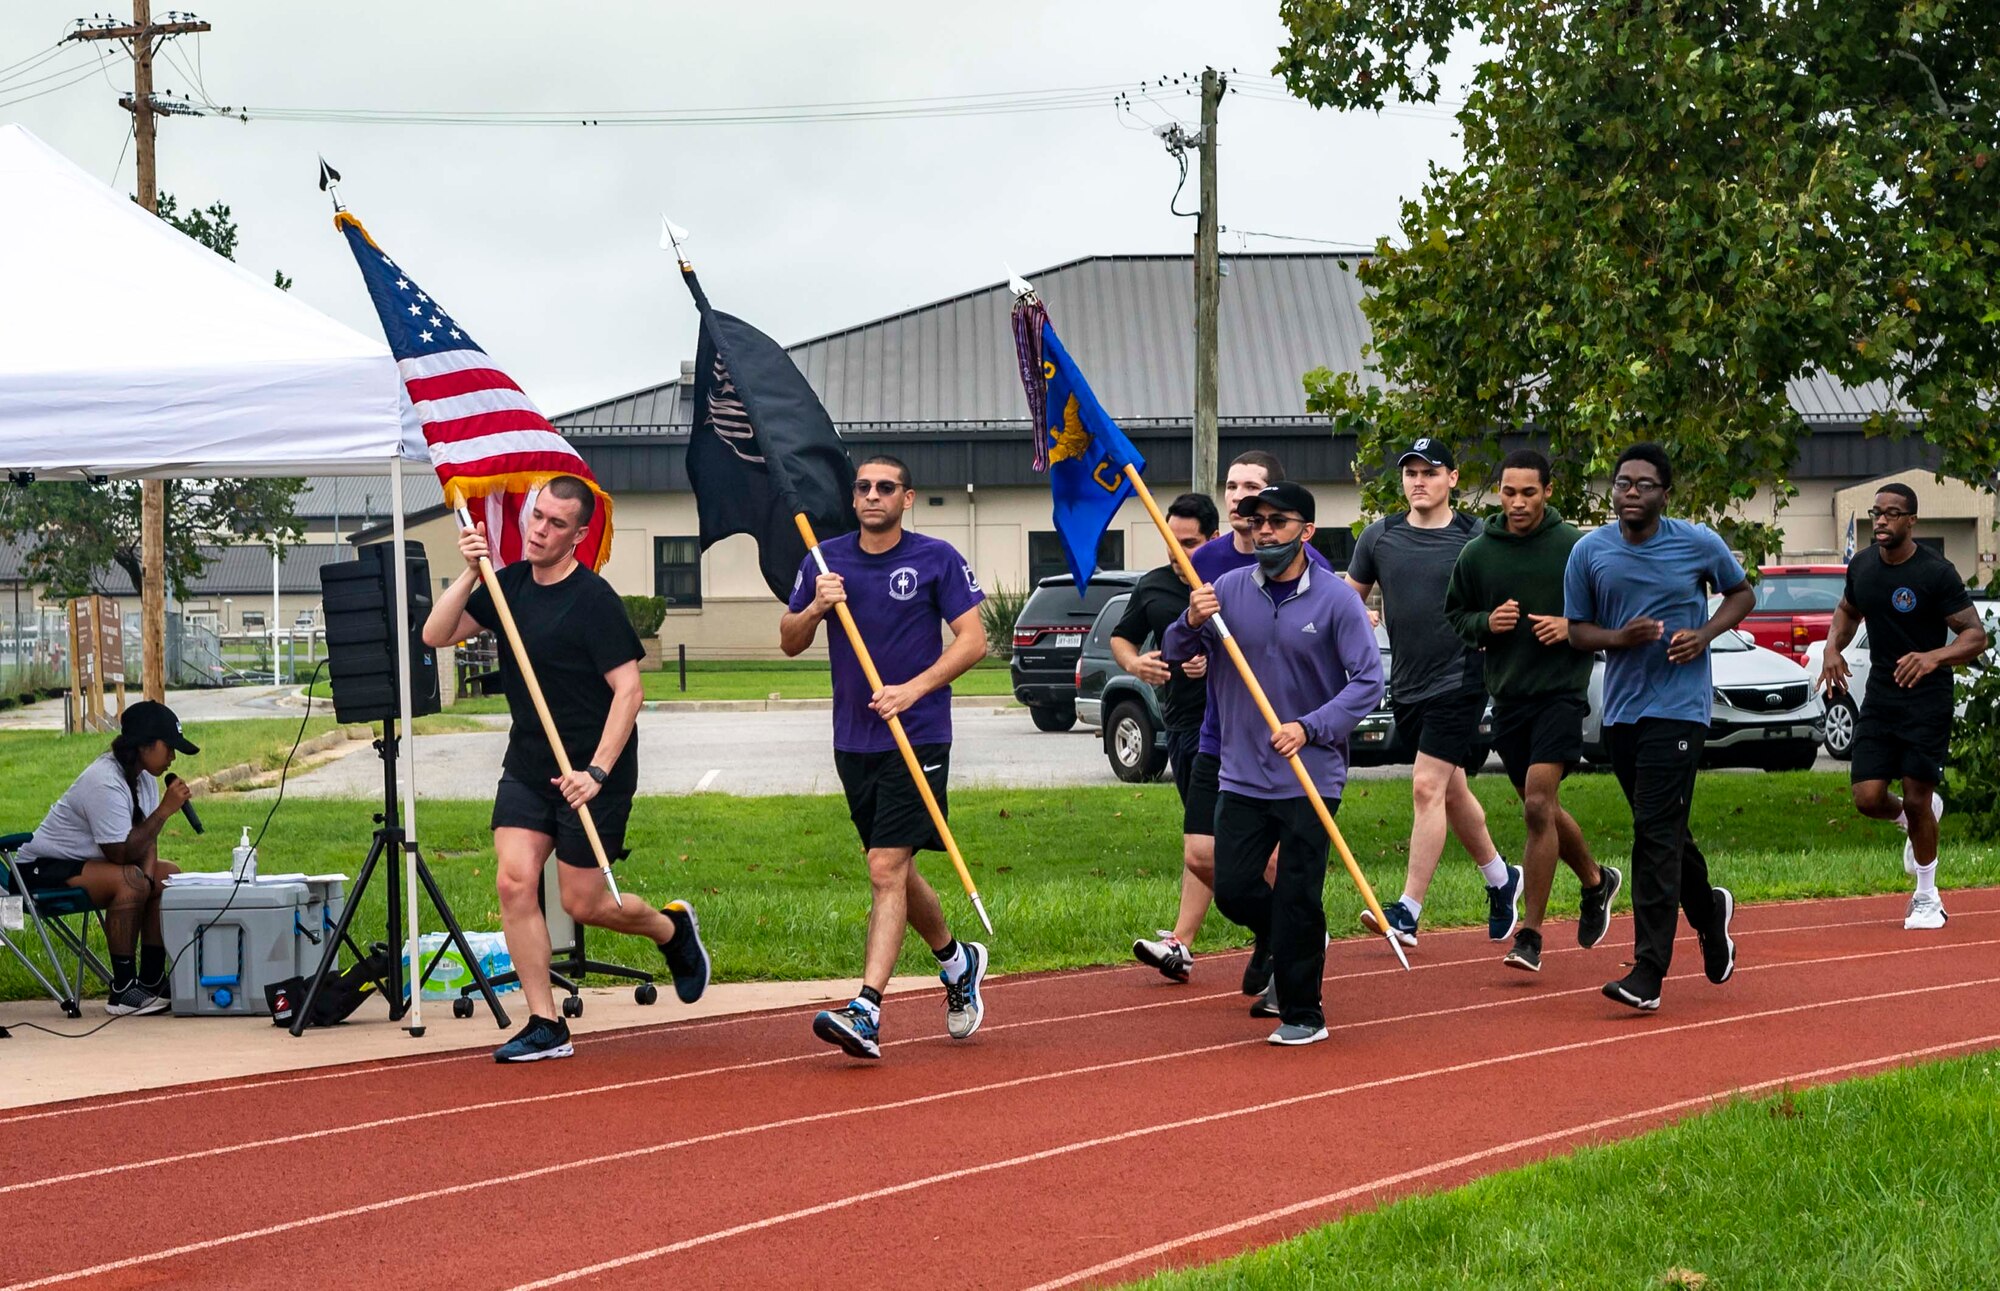 Members of the 436th Communications Squadron participate in the 2021 POW/MIA memorial run on Dover Air Force Base, Delaware, Sept. 17, 2021. Units from across Dover AFB ran in 30-minute increments for 12 hours leading to a retreat ceremony commemorating National POW/MIA Recognition Day. (U.S. Air Force photo by Senior Airman Stephani Barge)